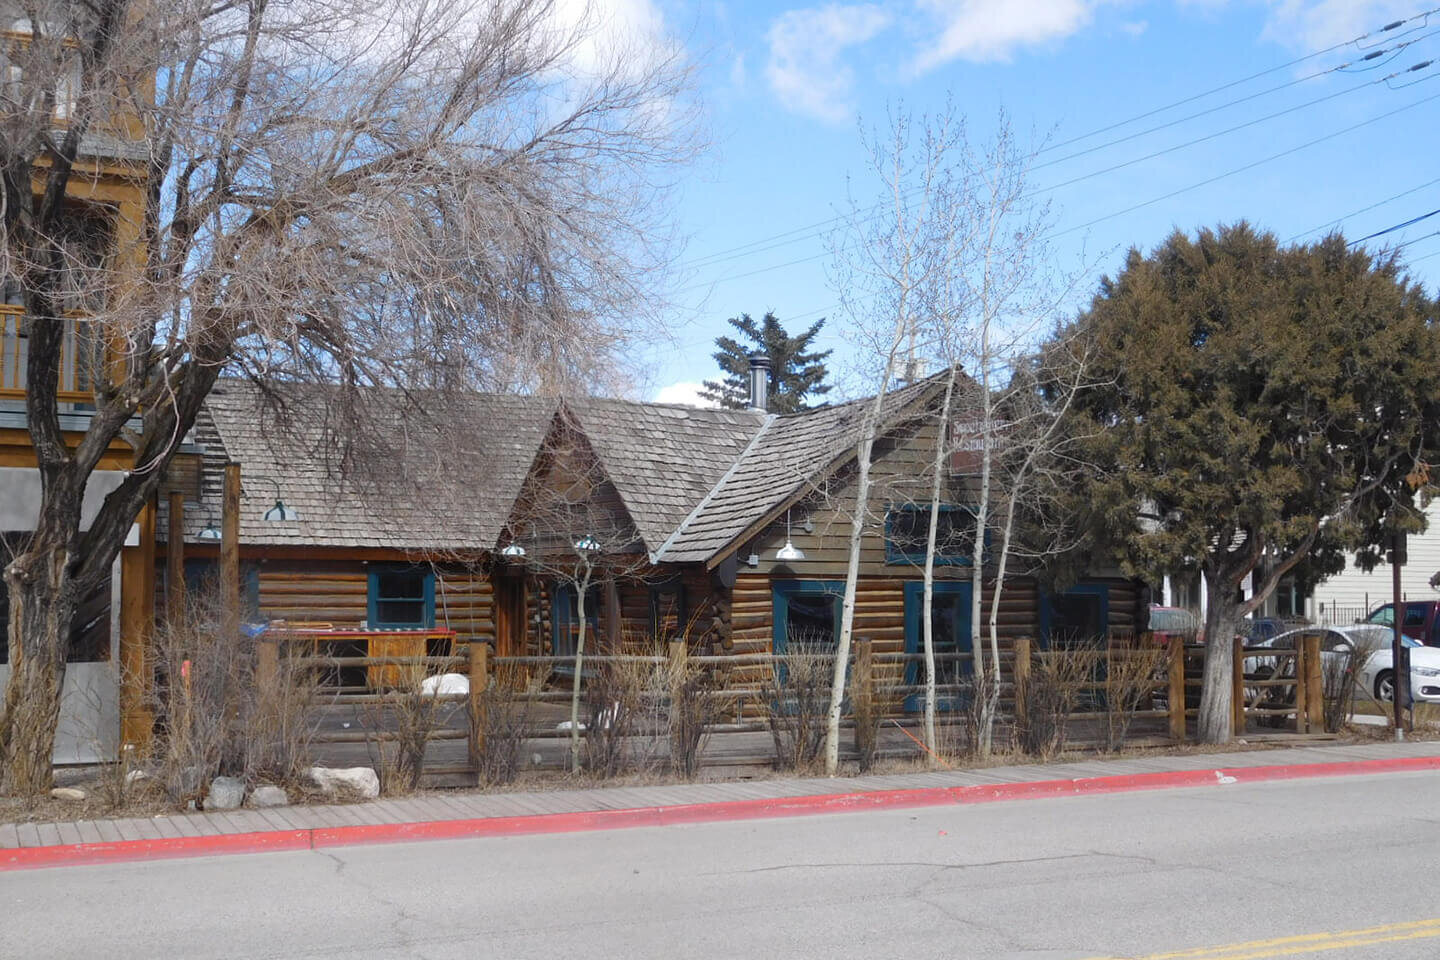 Previous building state and Sweetwater Restaurant in 2017